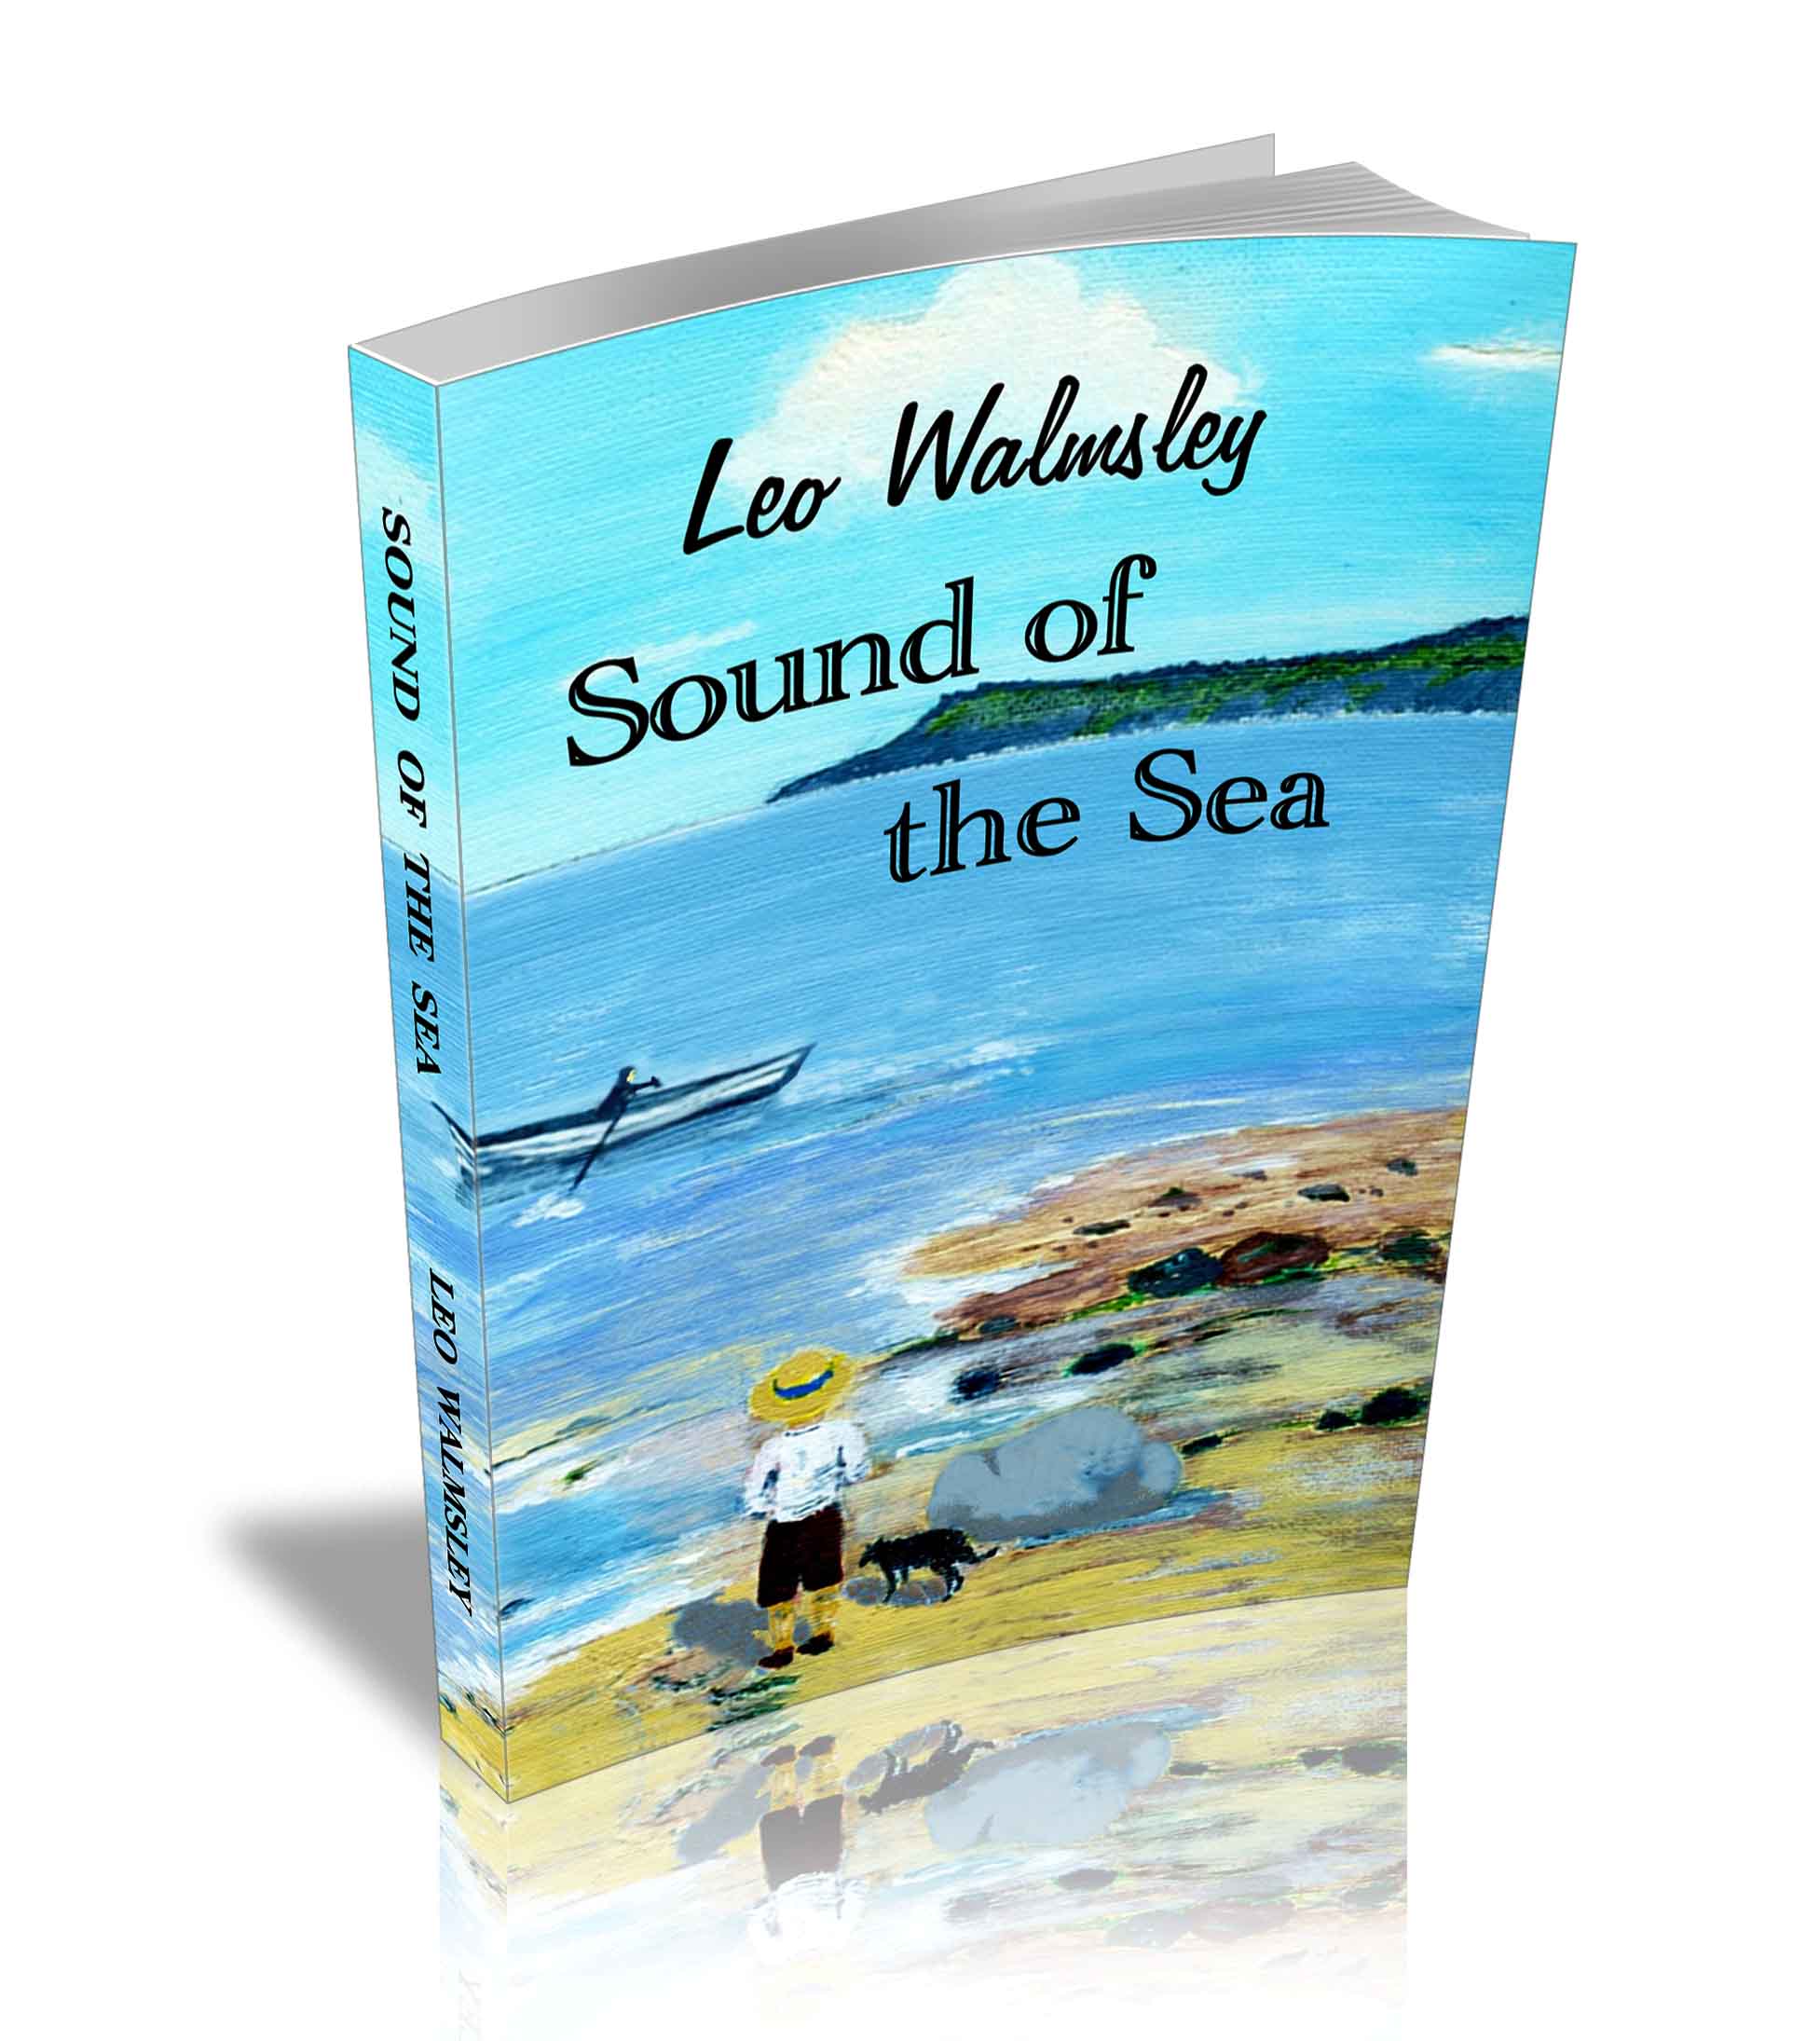 New edition of Sound of the Sea